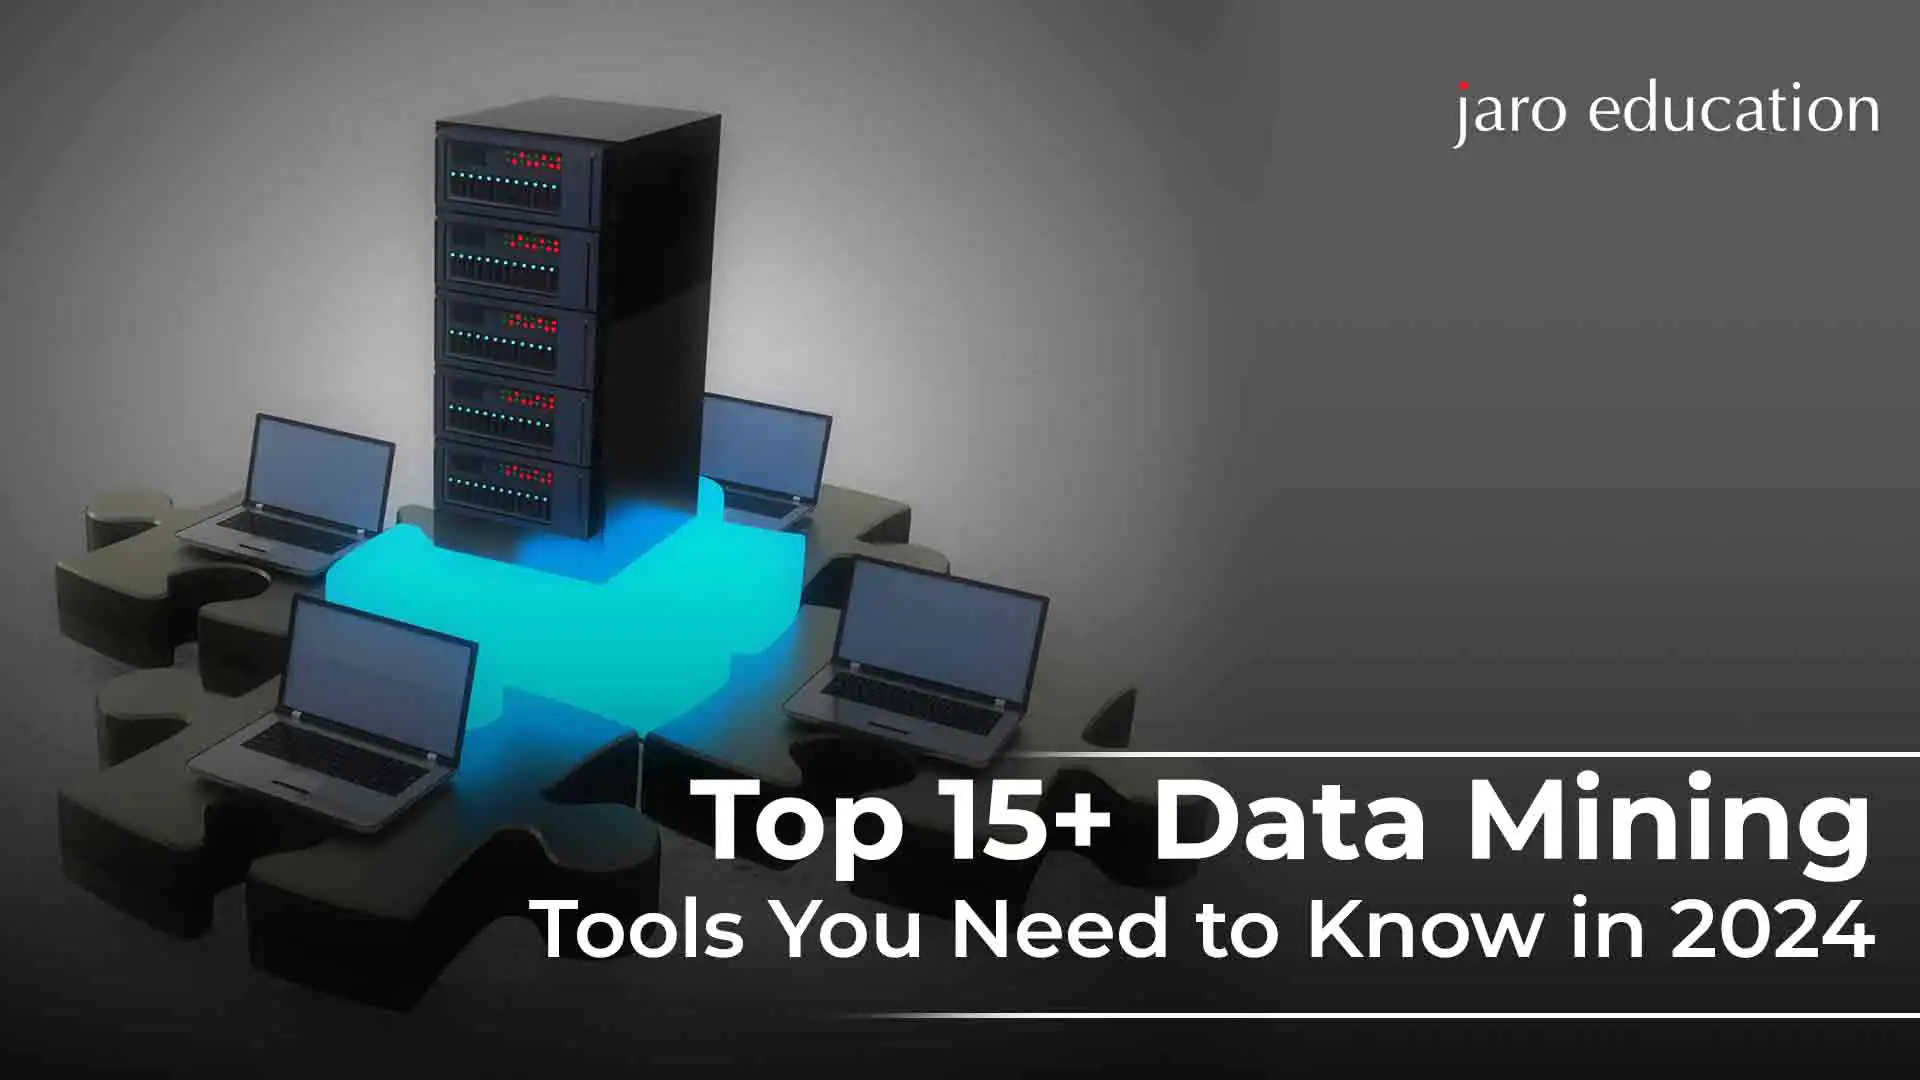 Top 15+ Data Mining Tools You Need to Know in 2024